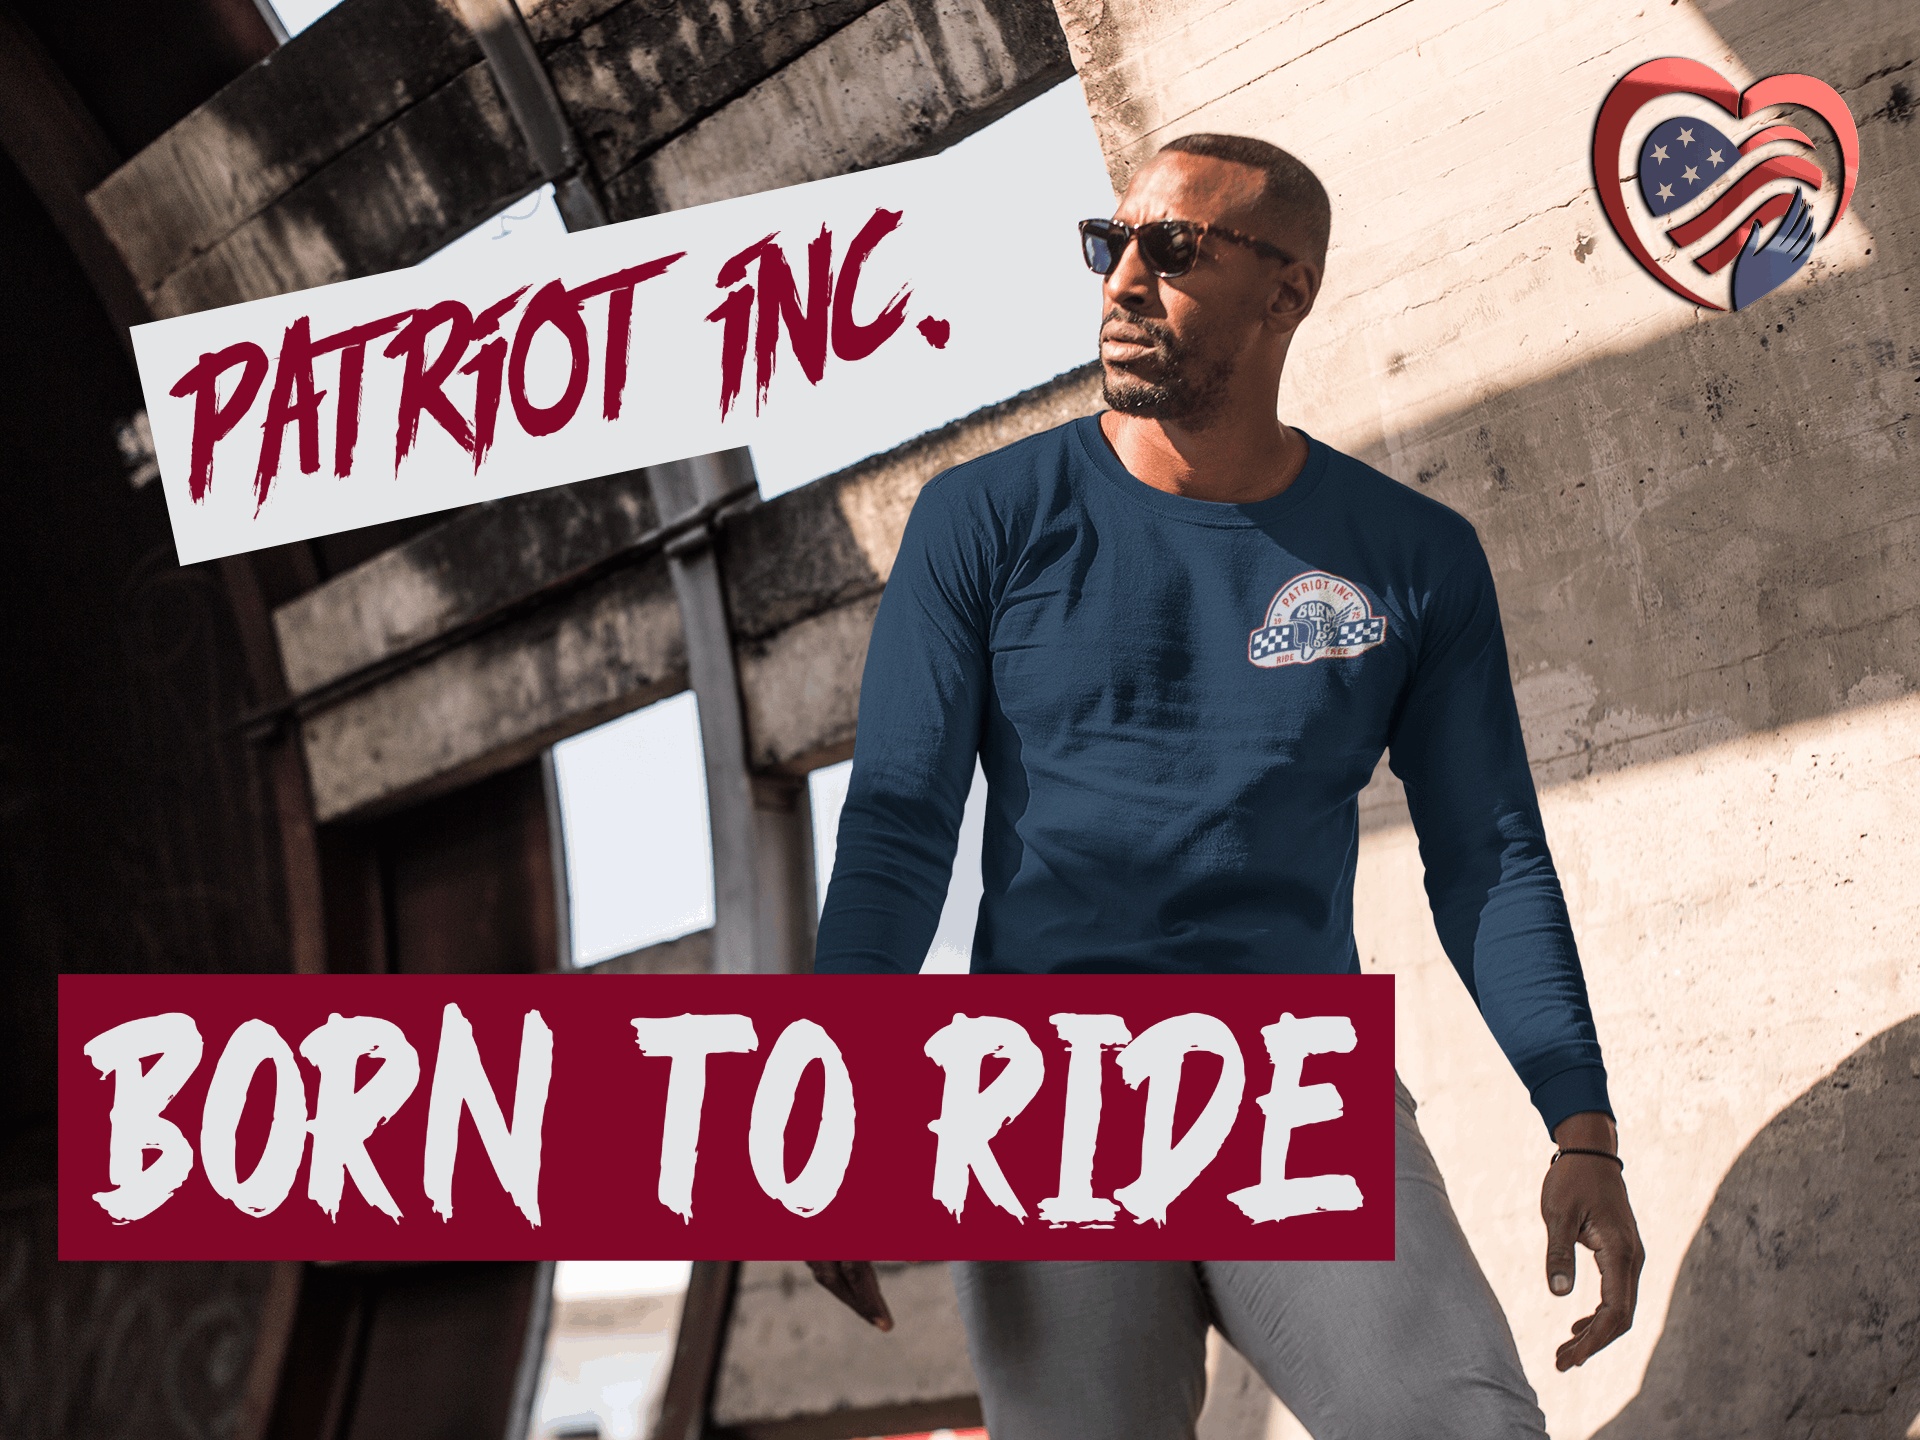 Patriot Inc. - Born To Ride Long Sleeve Tee - Free Shipping! - Pledge Project